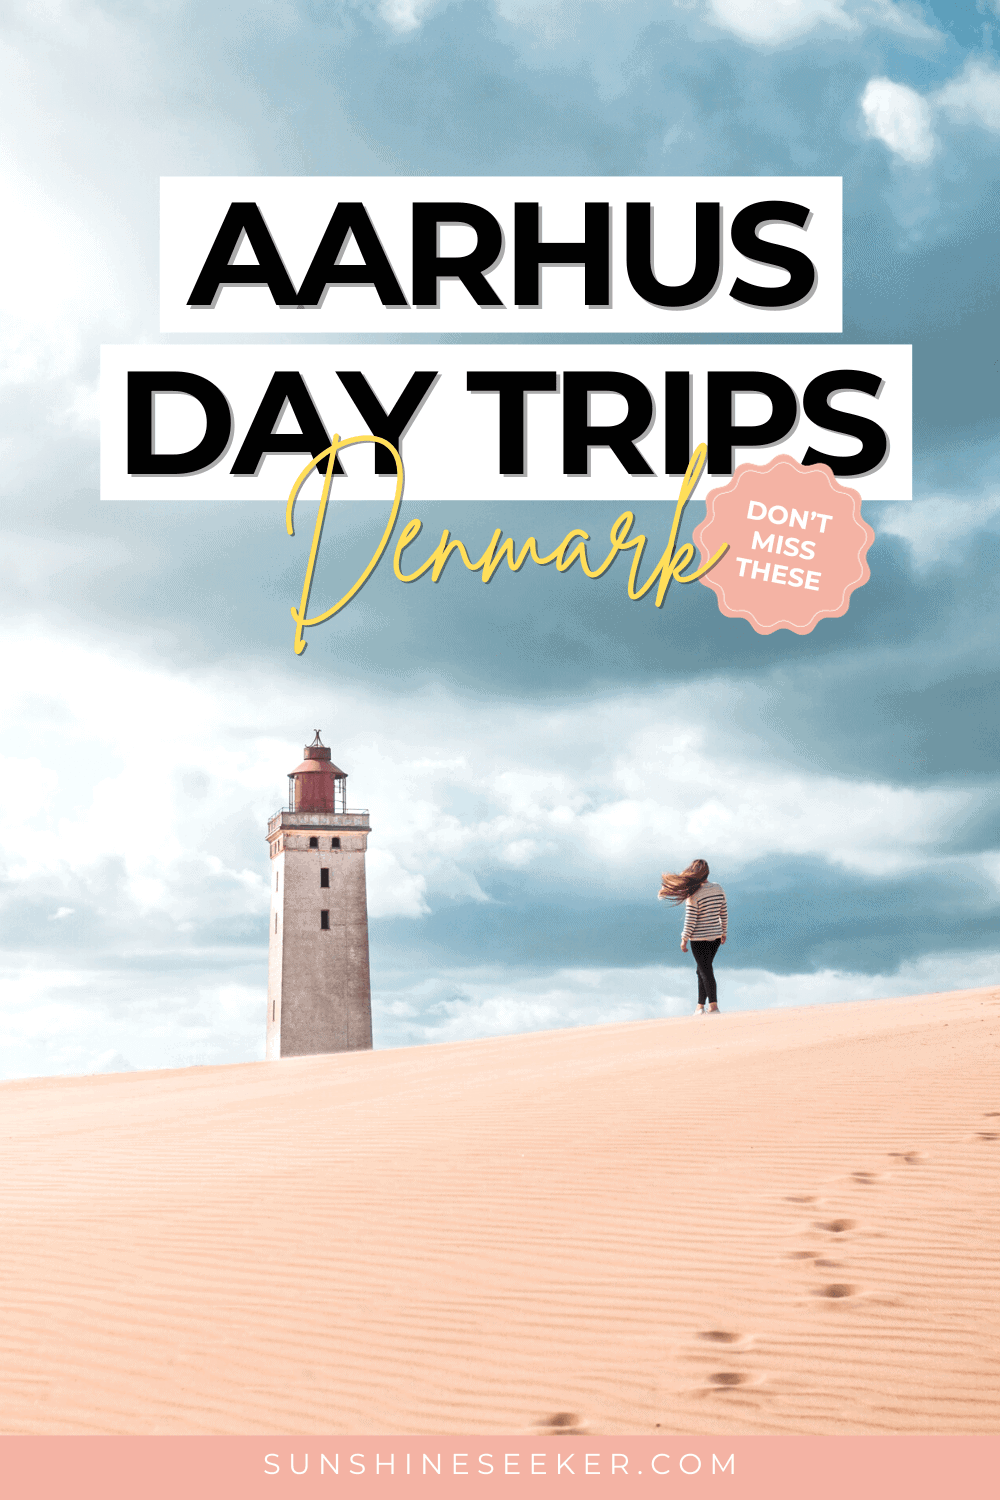 The best day trips from Aarhus in Denmark. Discover sand dunes, lighthouses, miles of sandy beaches, world class museums and medieval castles on a day trip from Aarhus.